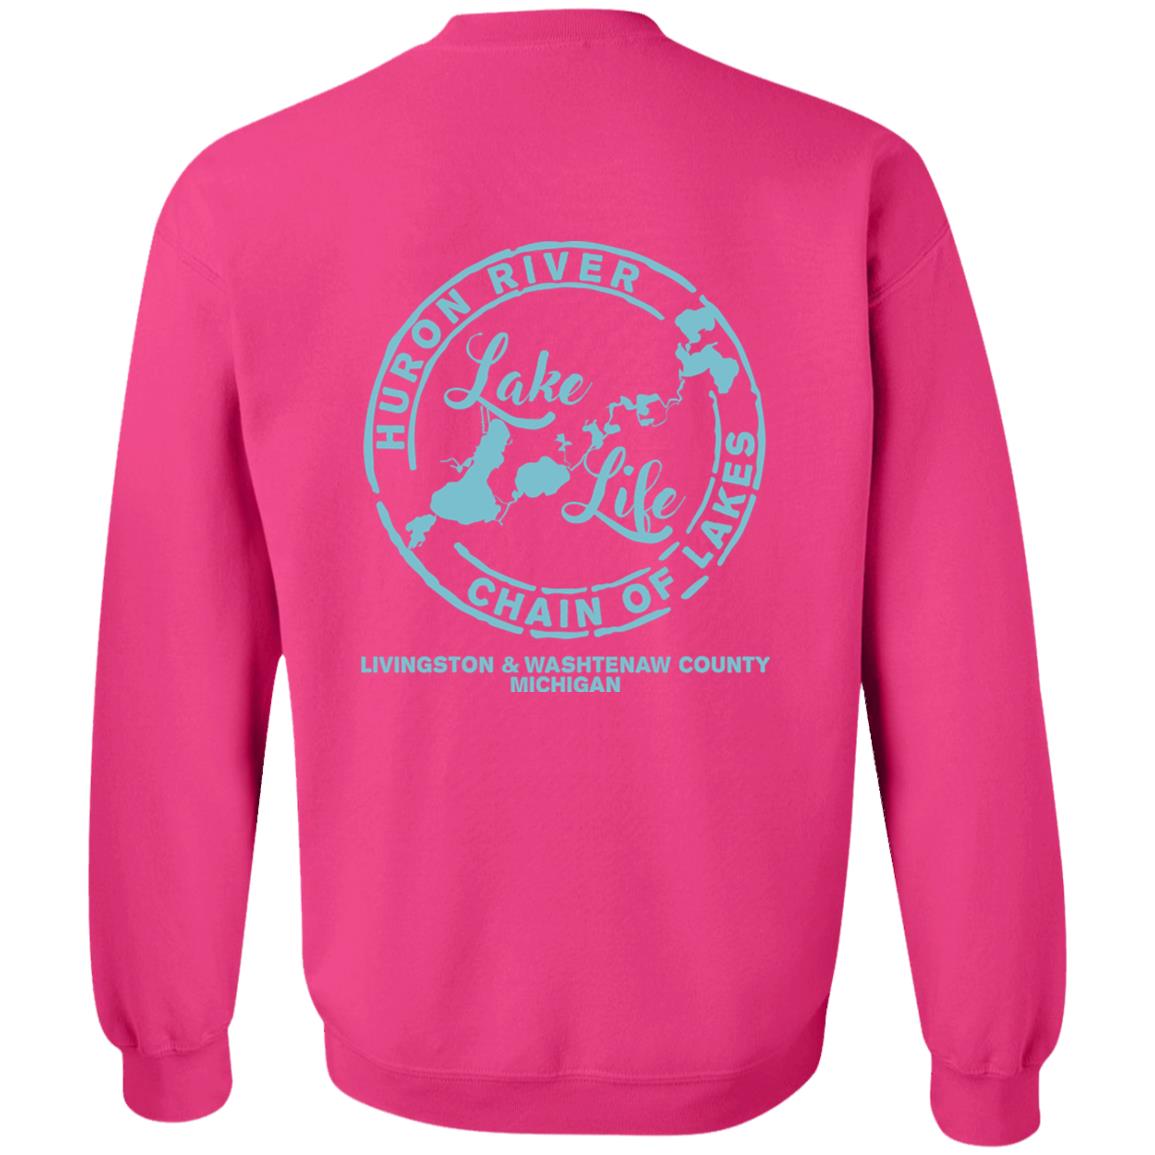 ***2 SIDED***  Living the Dream at the Lake HRCL LL 2 Sided G180 Crewneck Pullover Sweatshirt